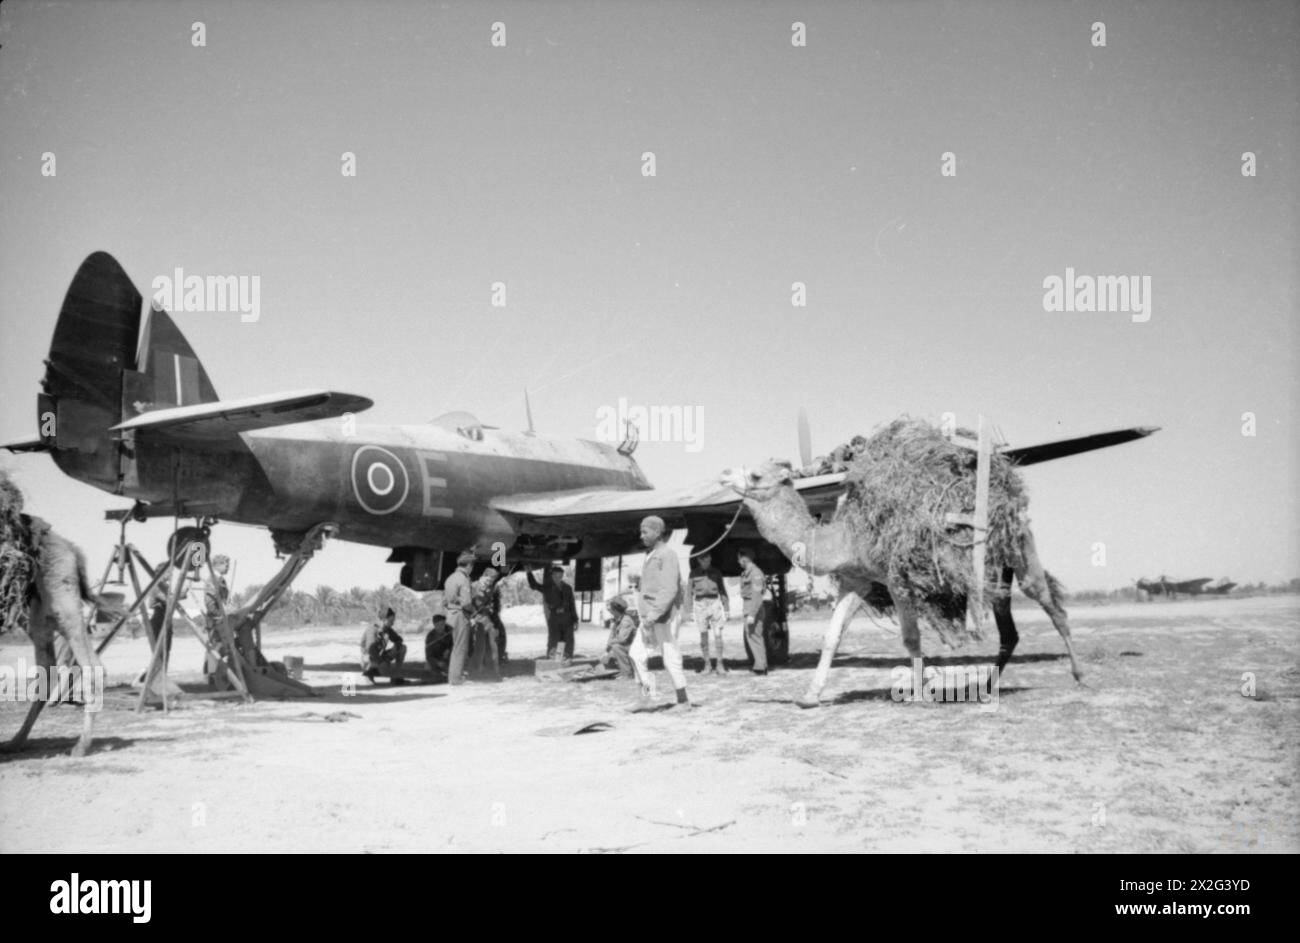 ROYAL AIR FORCE OPERATIONS IN THE MIDDLE EAST AND NORTH AFRICA, 1939-1943. - Local Arabs and their camels pass by Bristol Beaufighter Mark VIF, X8166 'E', raised by its tail while undergoing gun maintenance and harmonisation at Castel Benito, Libya Royal Air Force, Royal Air Force Regiment, Sqdn, 89 Stock Photo